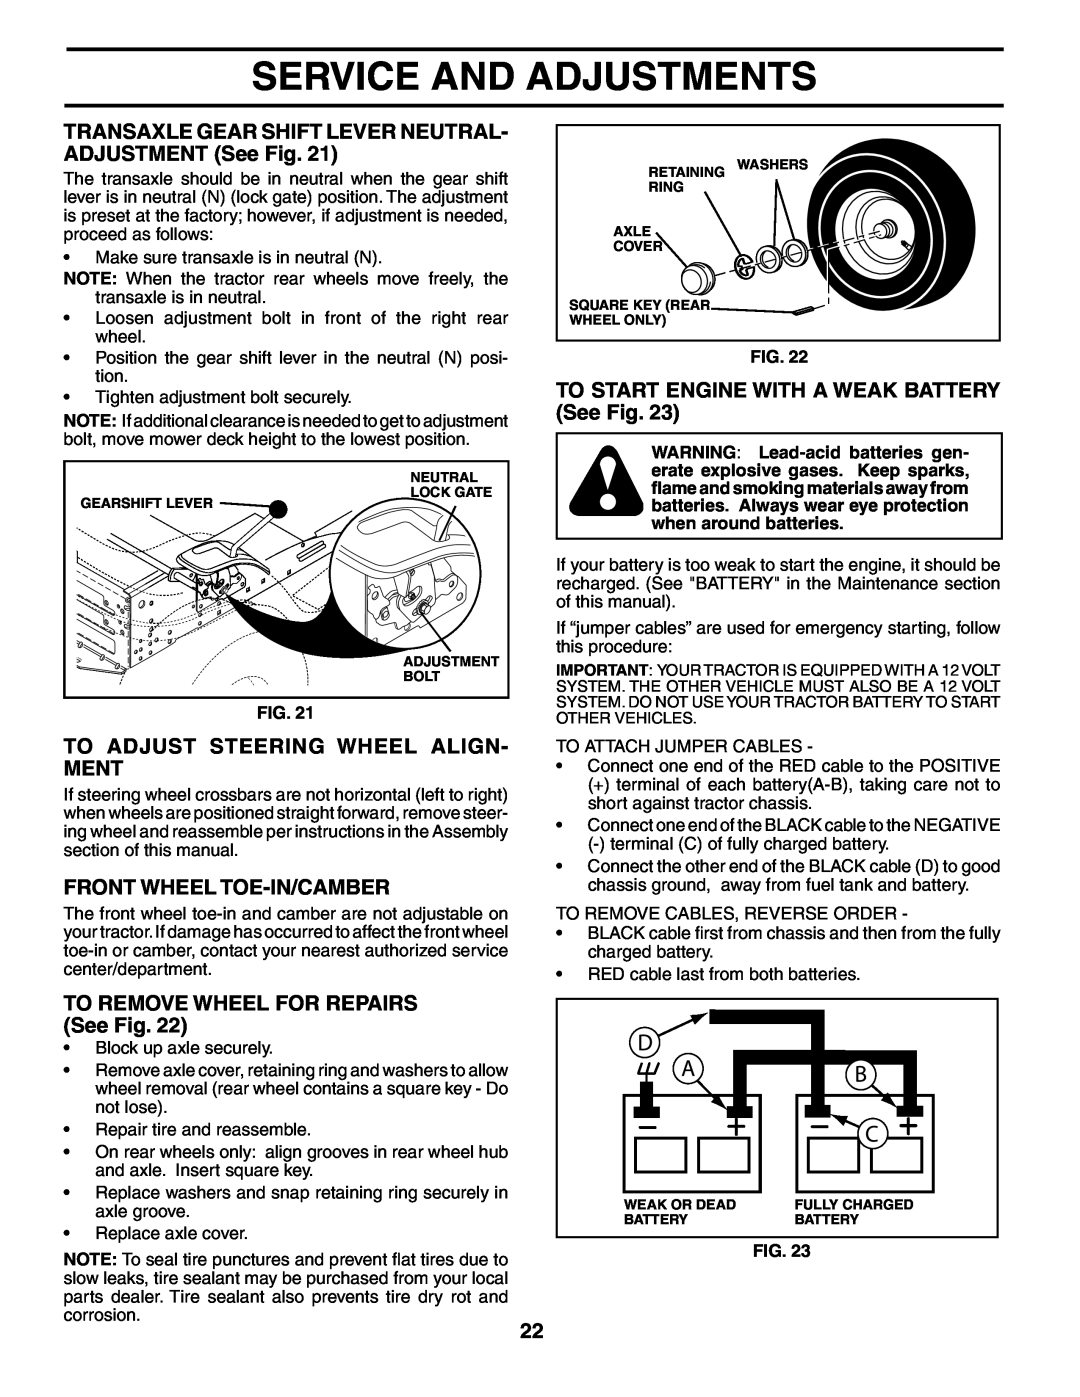 Weed Eater HD13538 To Adjust Steering Wheel Align- Ment, Front Wheel Toe-In/Camber, TO REMOVE WHEEL FOR REPAIRS See Fig 